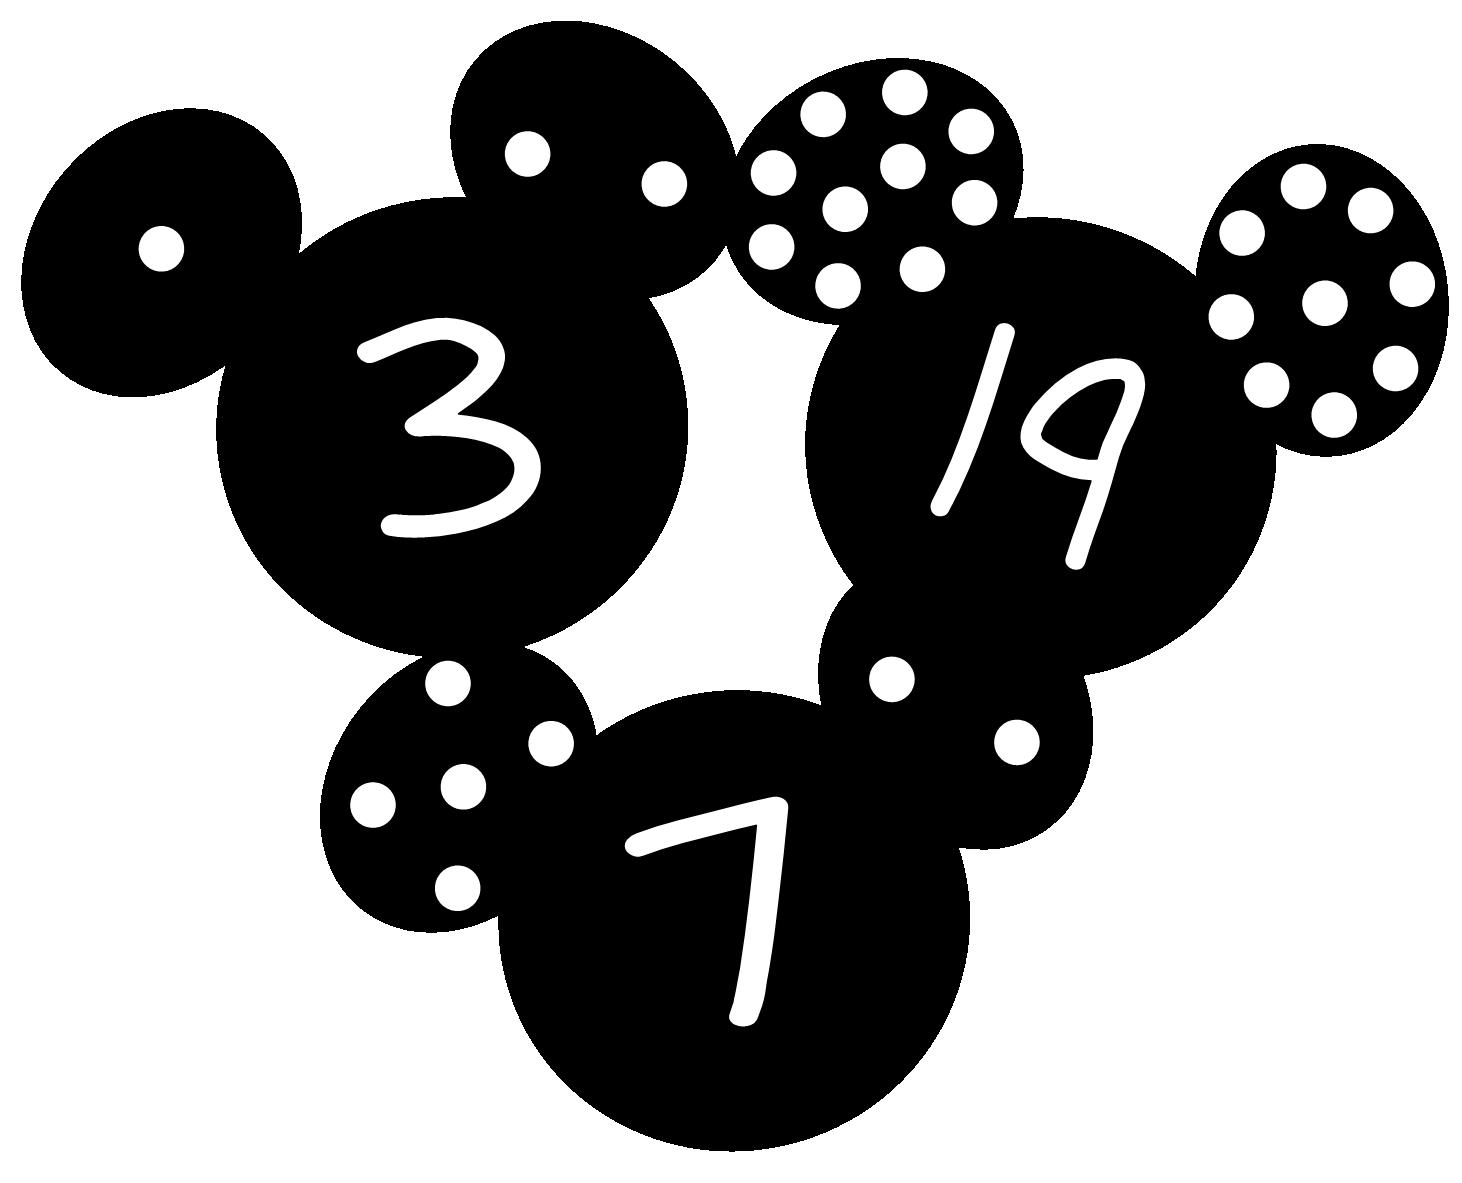 Mickey mouse ears · Small mickey mouse ears template · Mickey mouse ears clip art